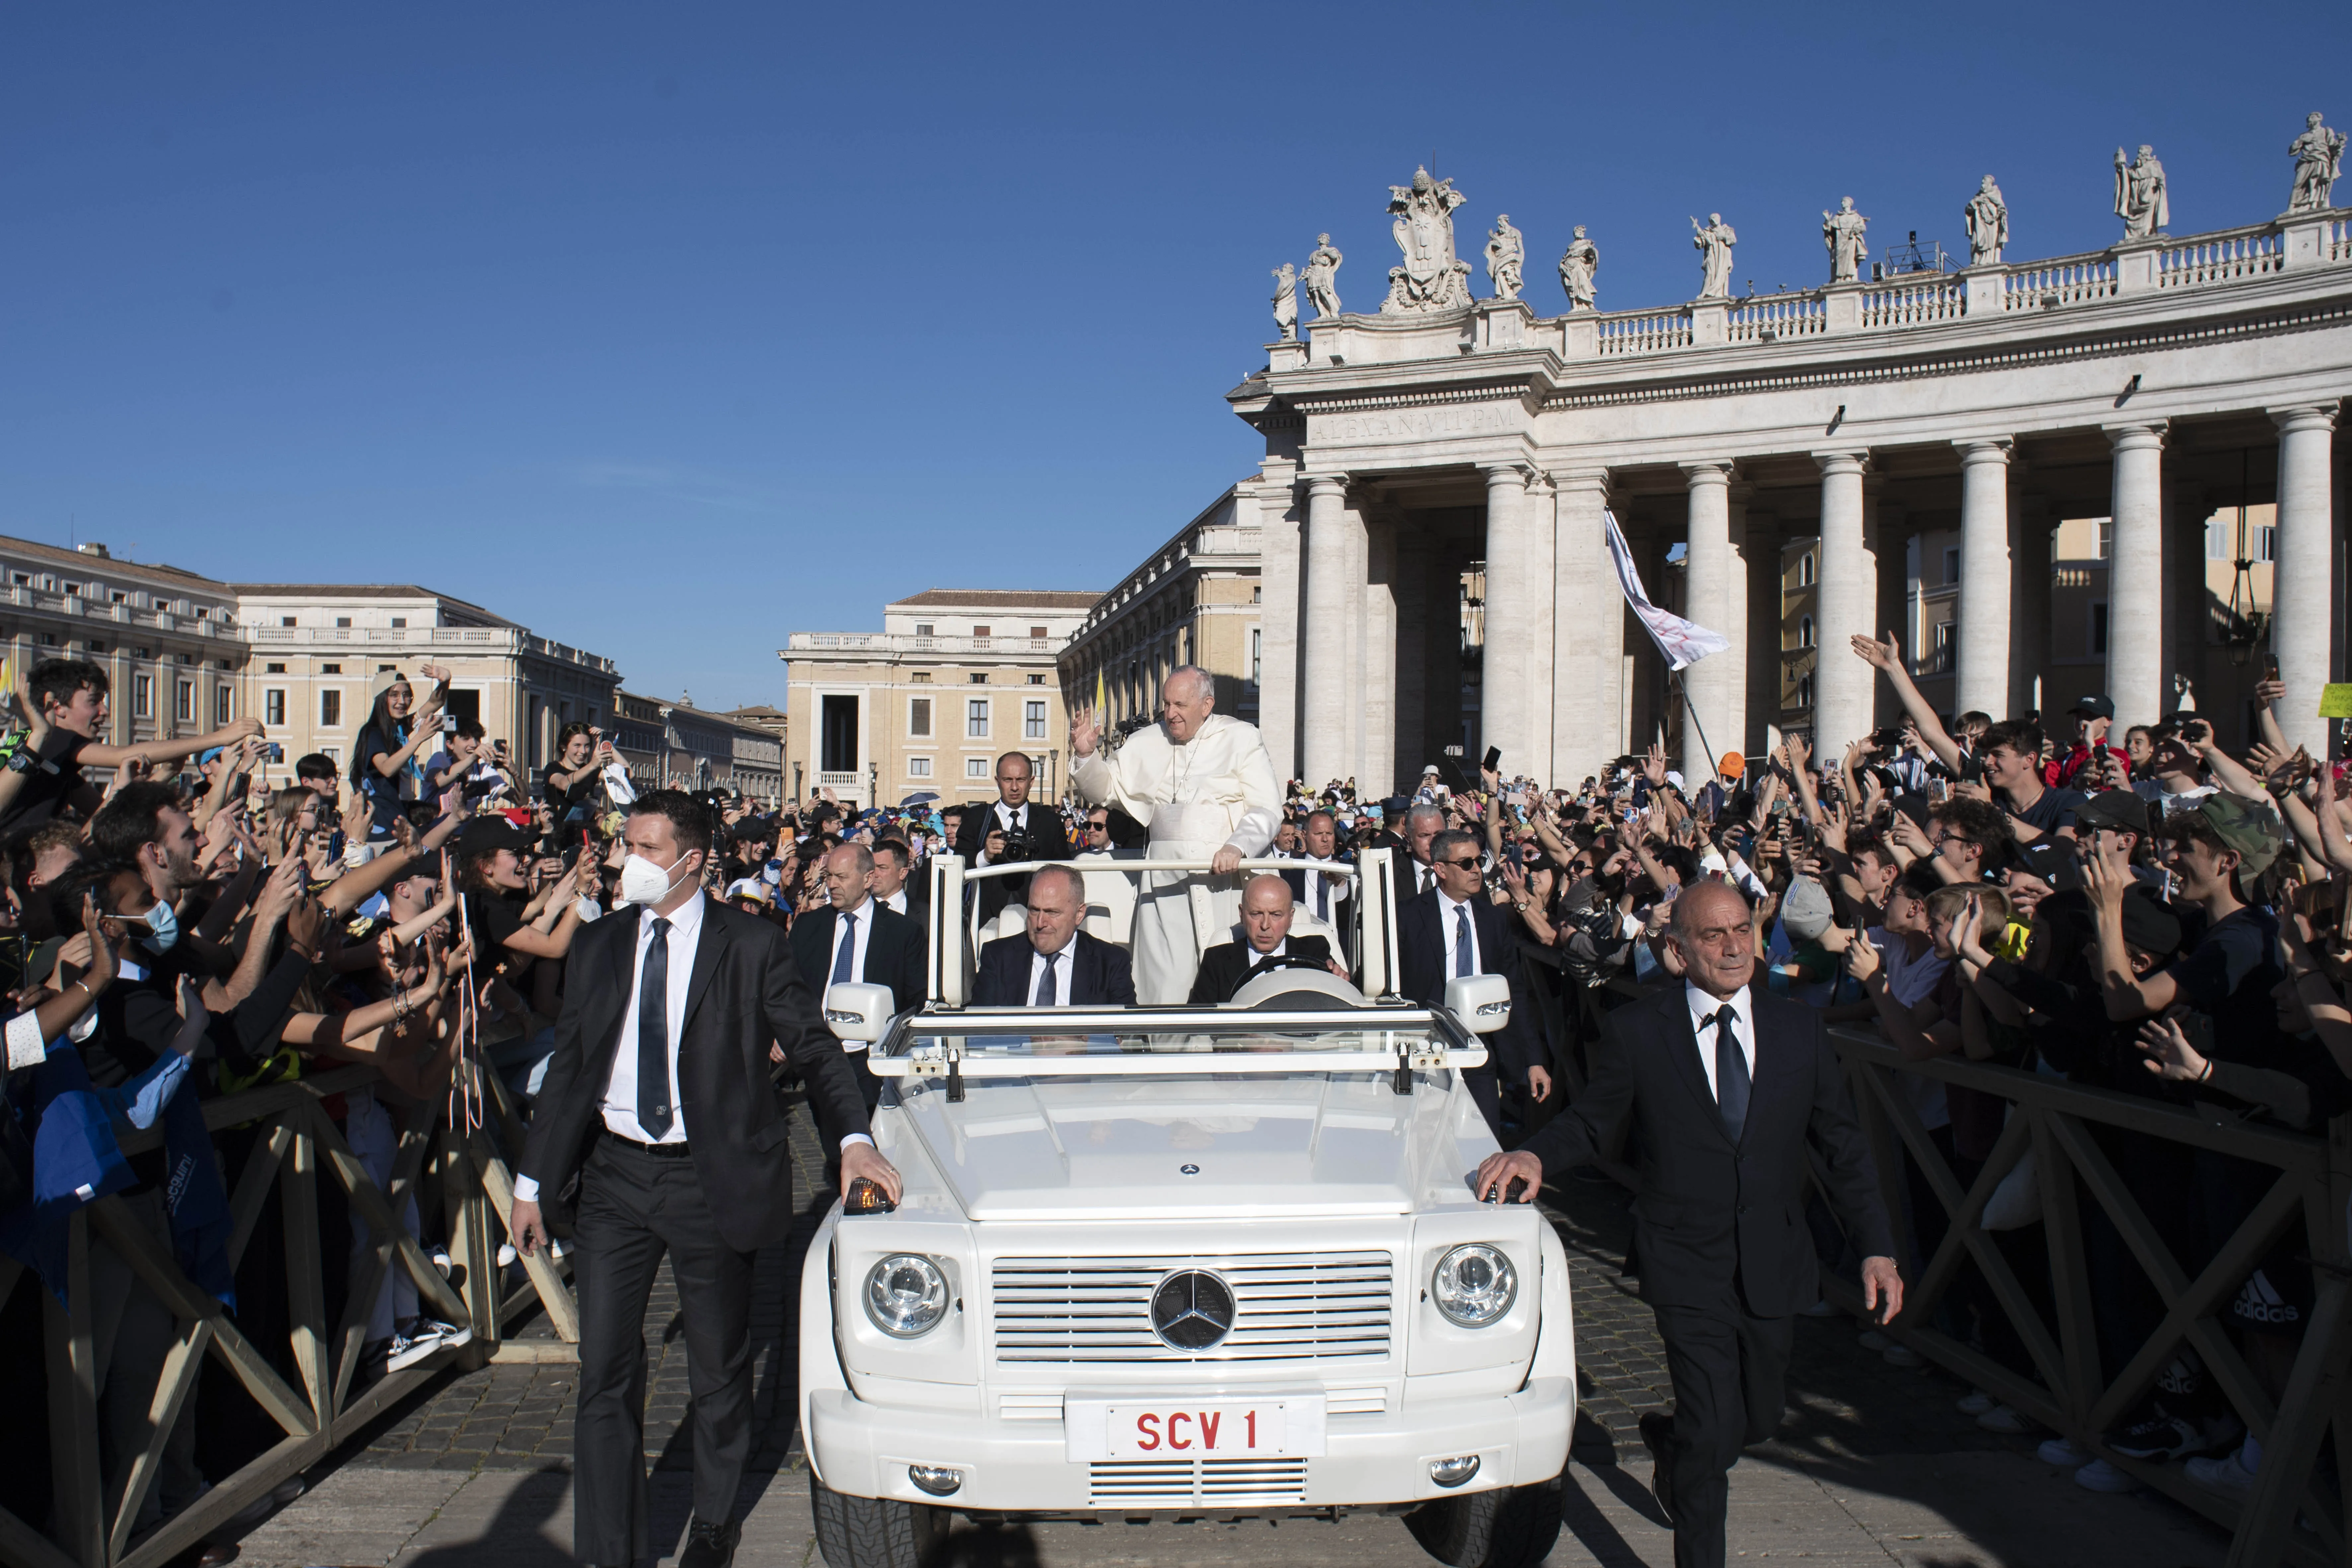 Pope Francis greets 80,000 teens on pilgrimage in St. Peter’s Square on April 18, 2022.?w=200&h=150